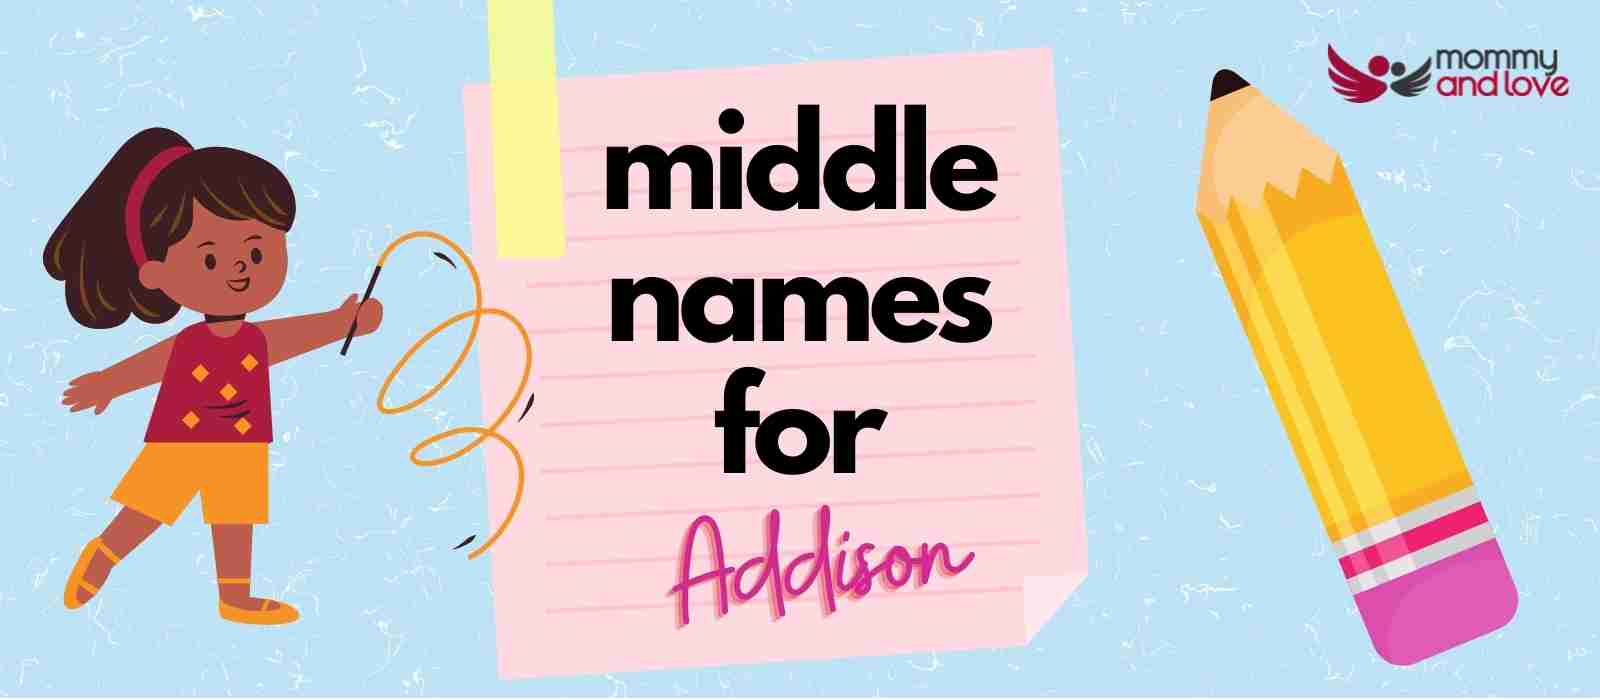 Middle Names for Addison